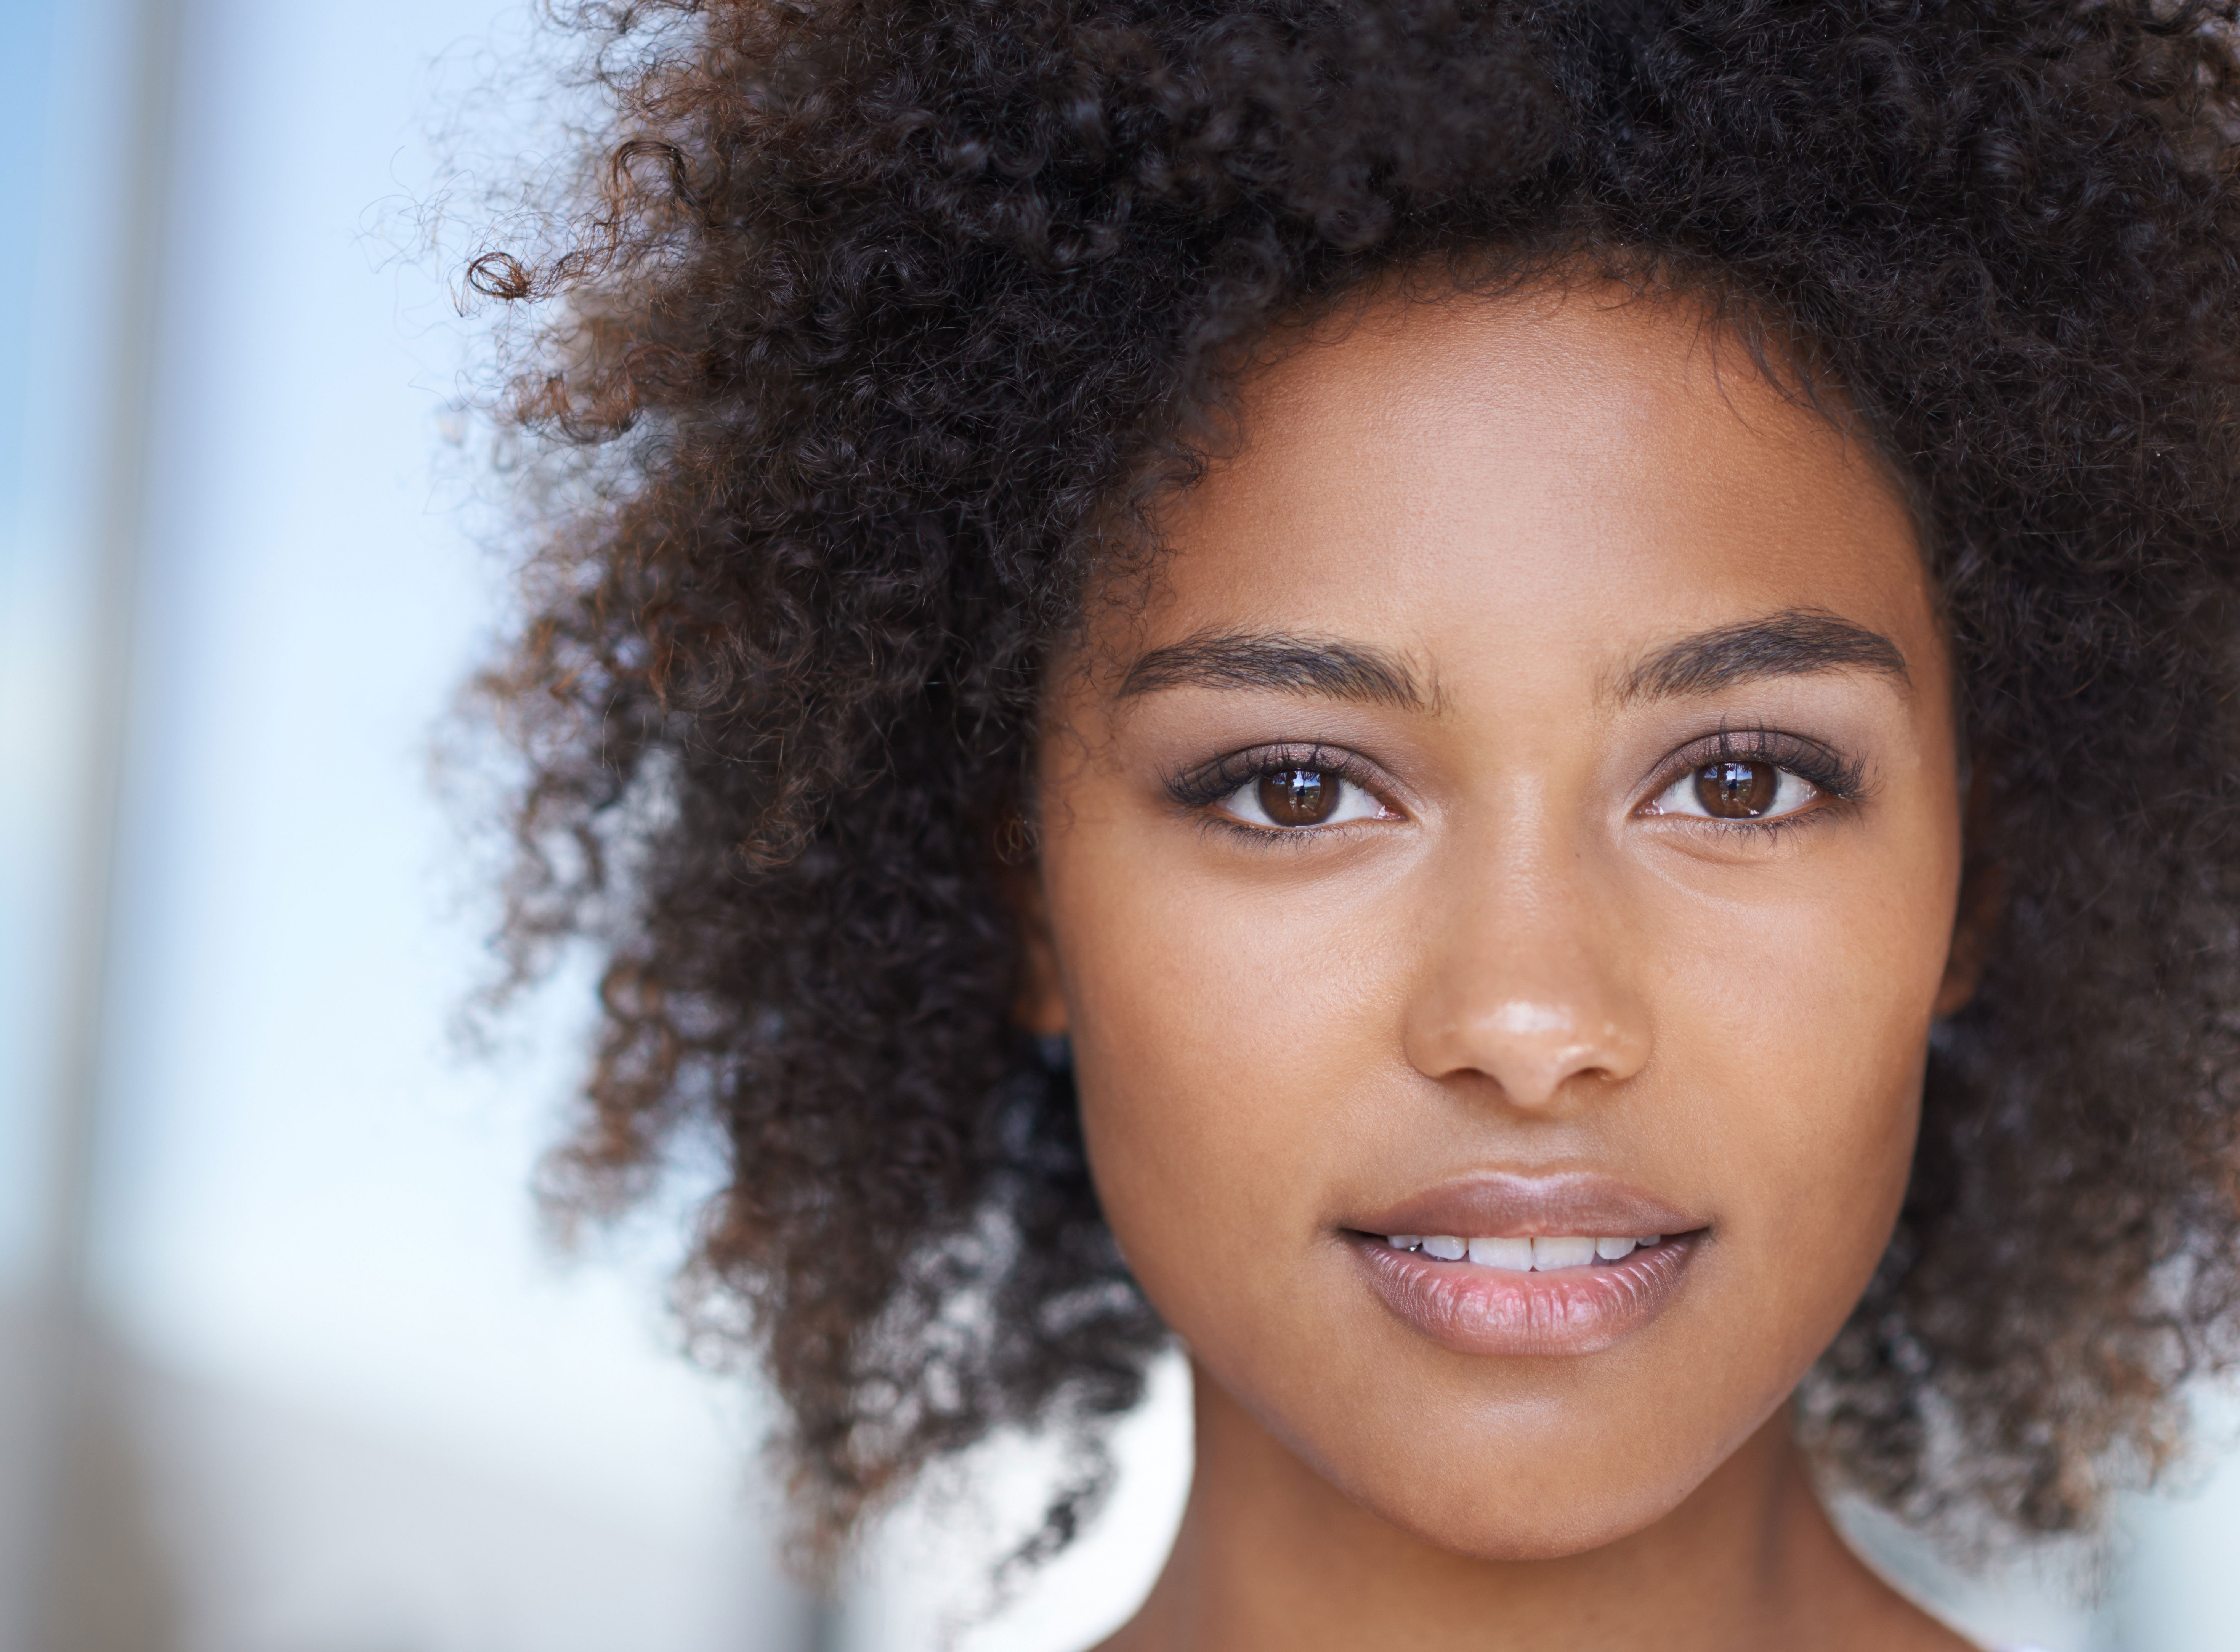 A Video To Explain Natural Hair To White People Is Finally Here - Essence